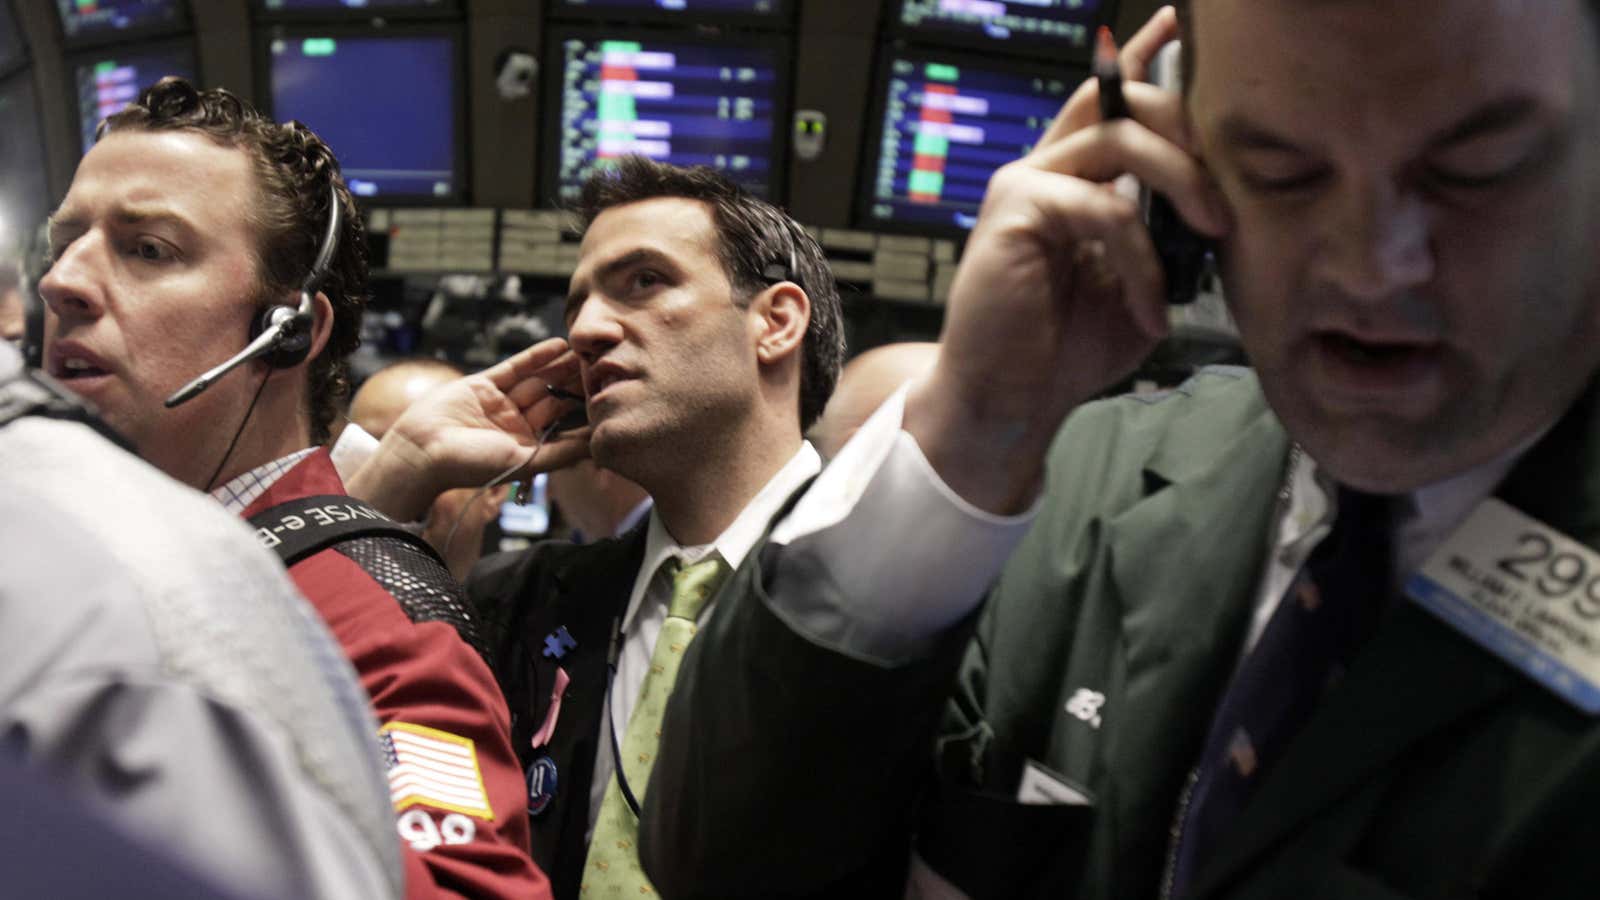 Study says: High-frequency trading has little effect on the average Joe.